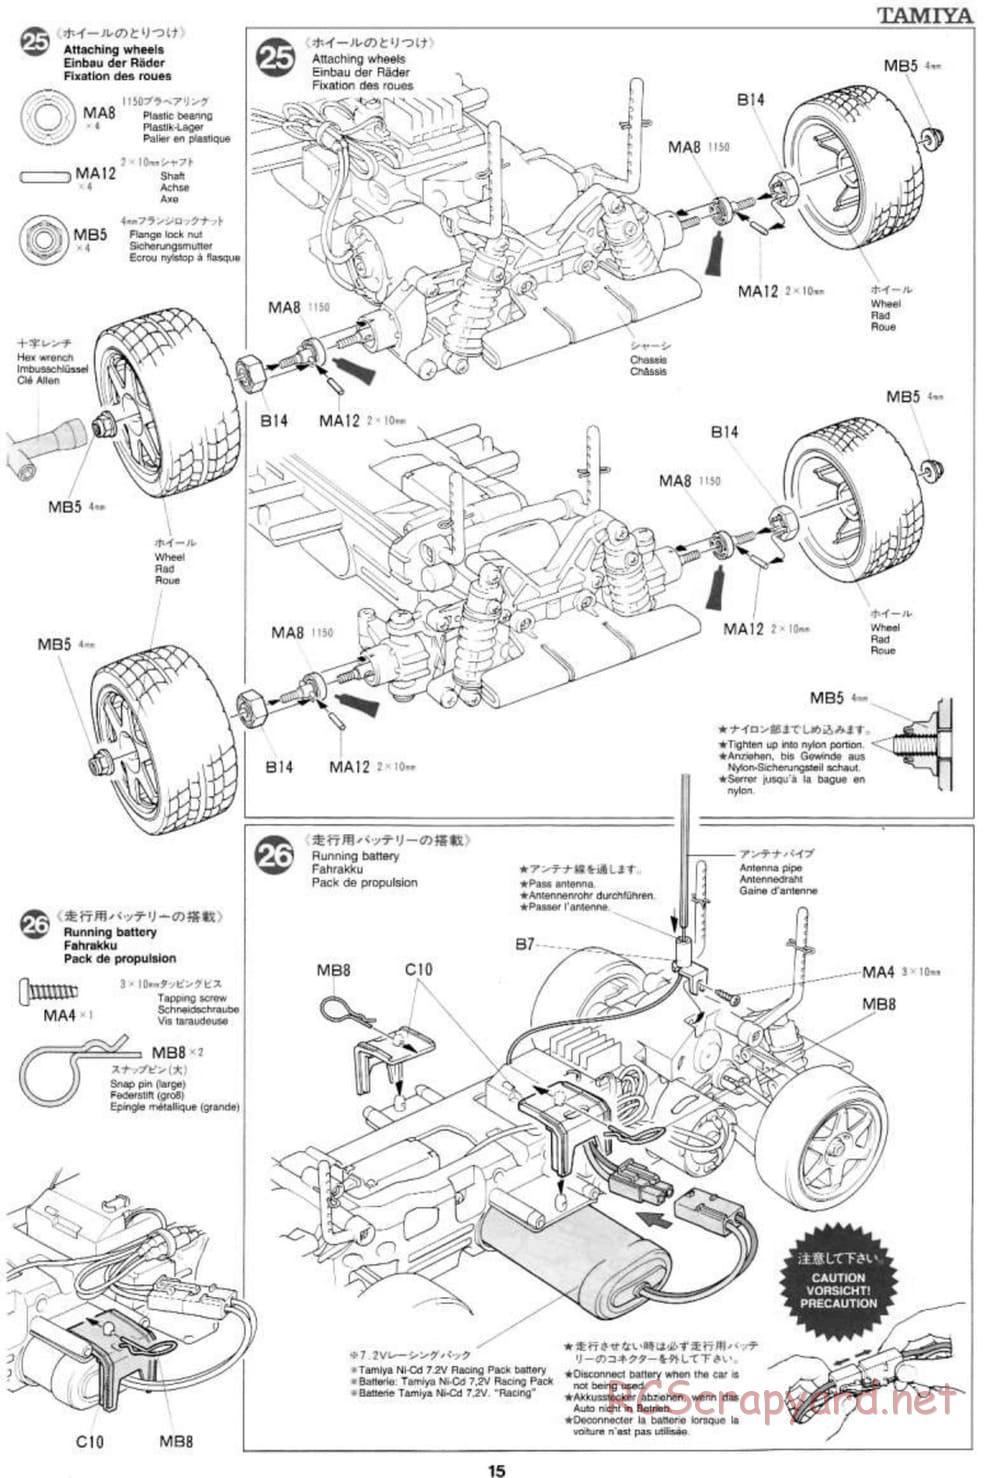 Tamiya - Toyota Celica GT-Four 97 Monte Carlo - TL-01 Chassis - Manual - Page 15